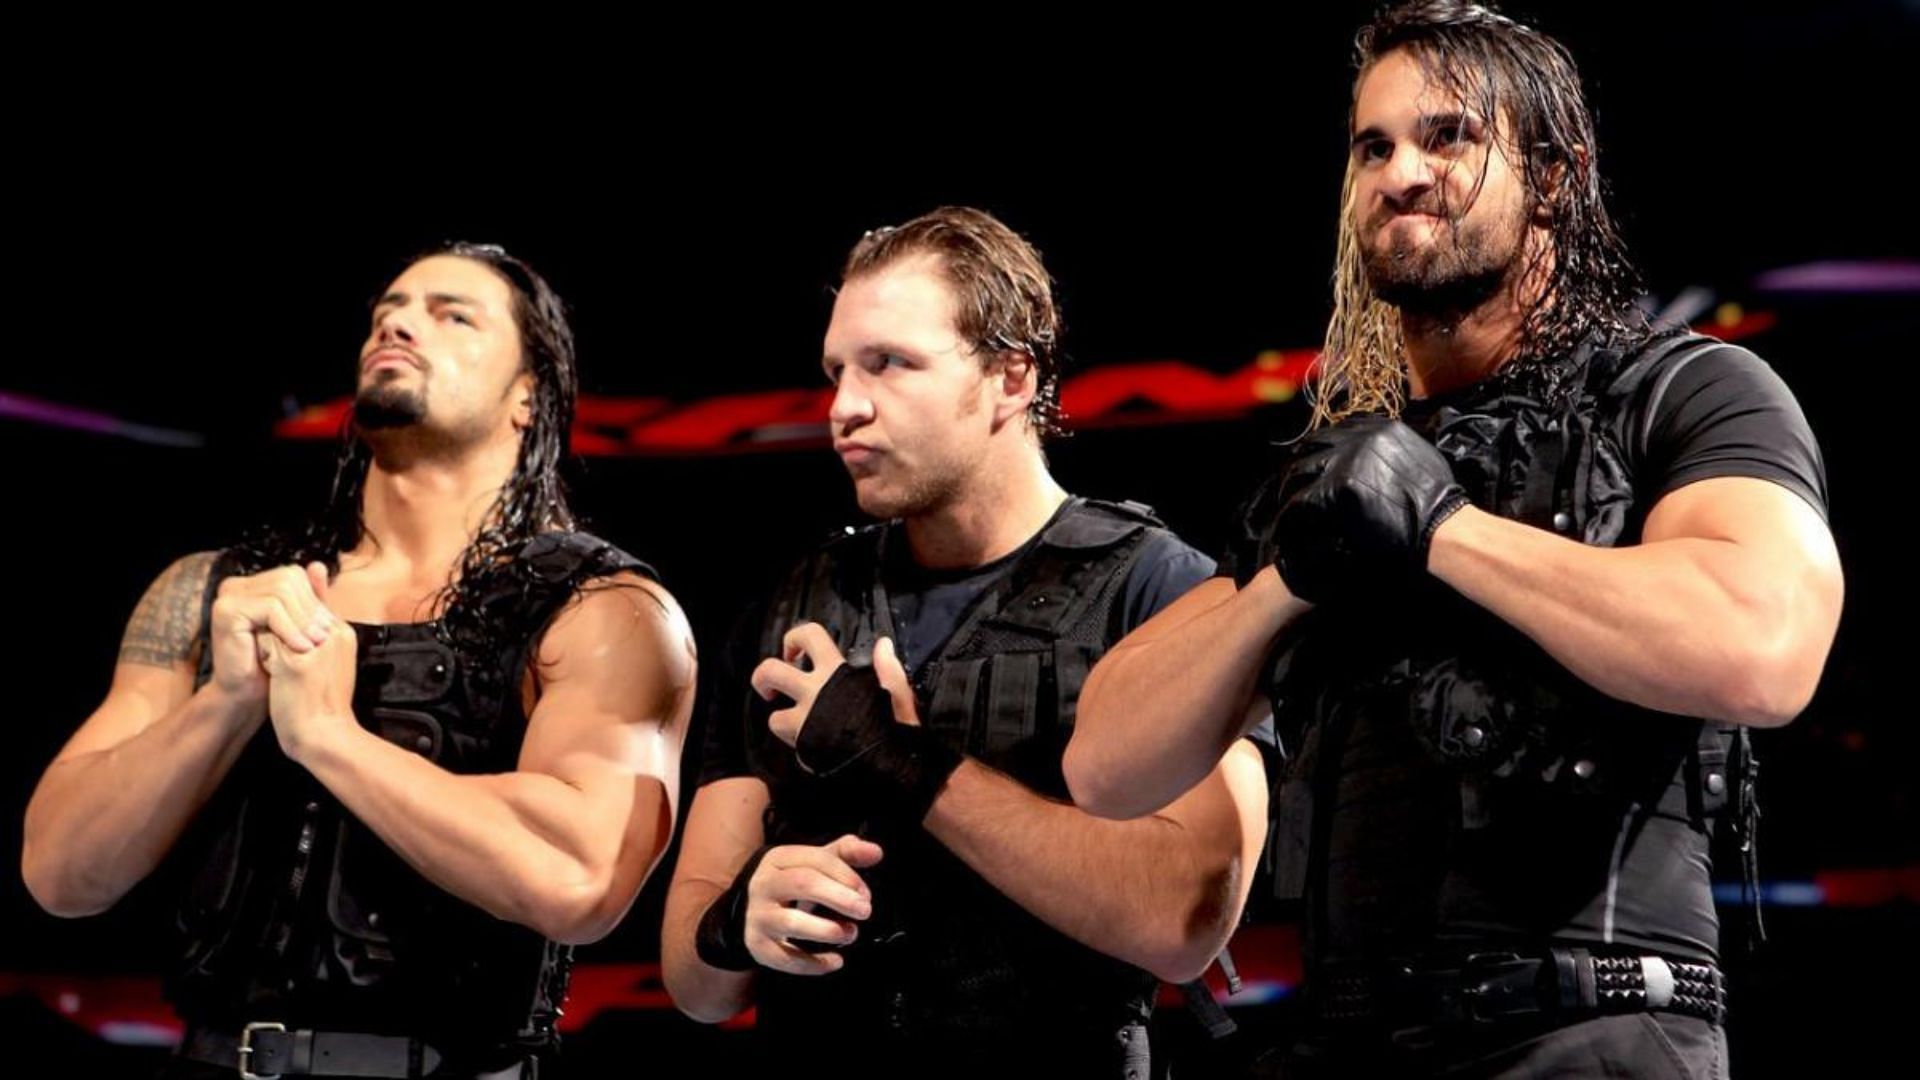 The Shield early in their main roster WWE runs.